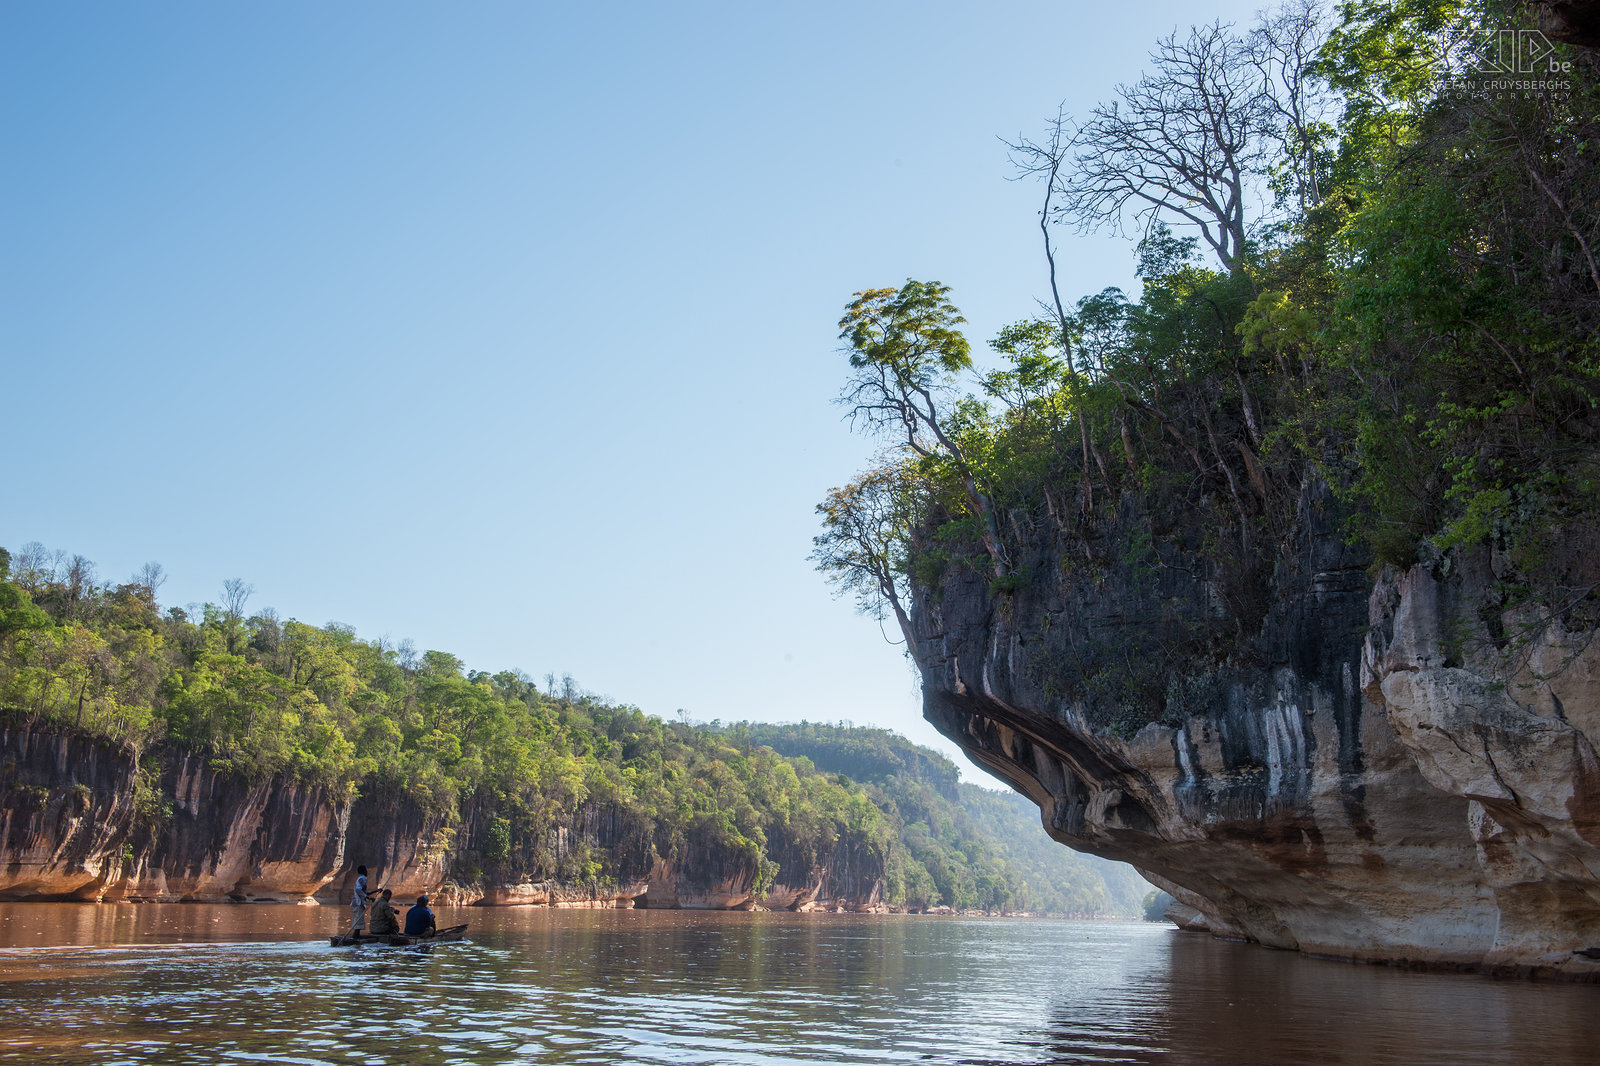 Tsingy - Manambolo river We also made a short trip with a dugout canoe in the gorge of Manambolo river and we visited a small cave with wonderful stalactites and stalagmites and saw the family tomb of the Vazimba tribe. Stefan Cruysberghs